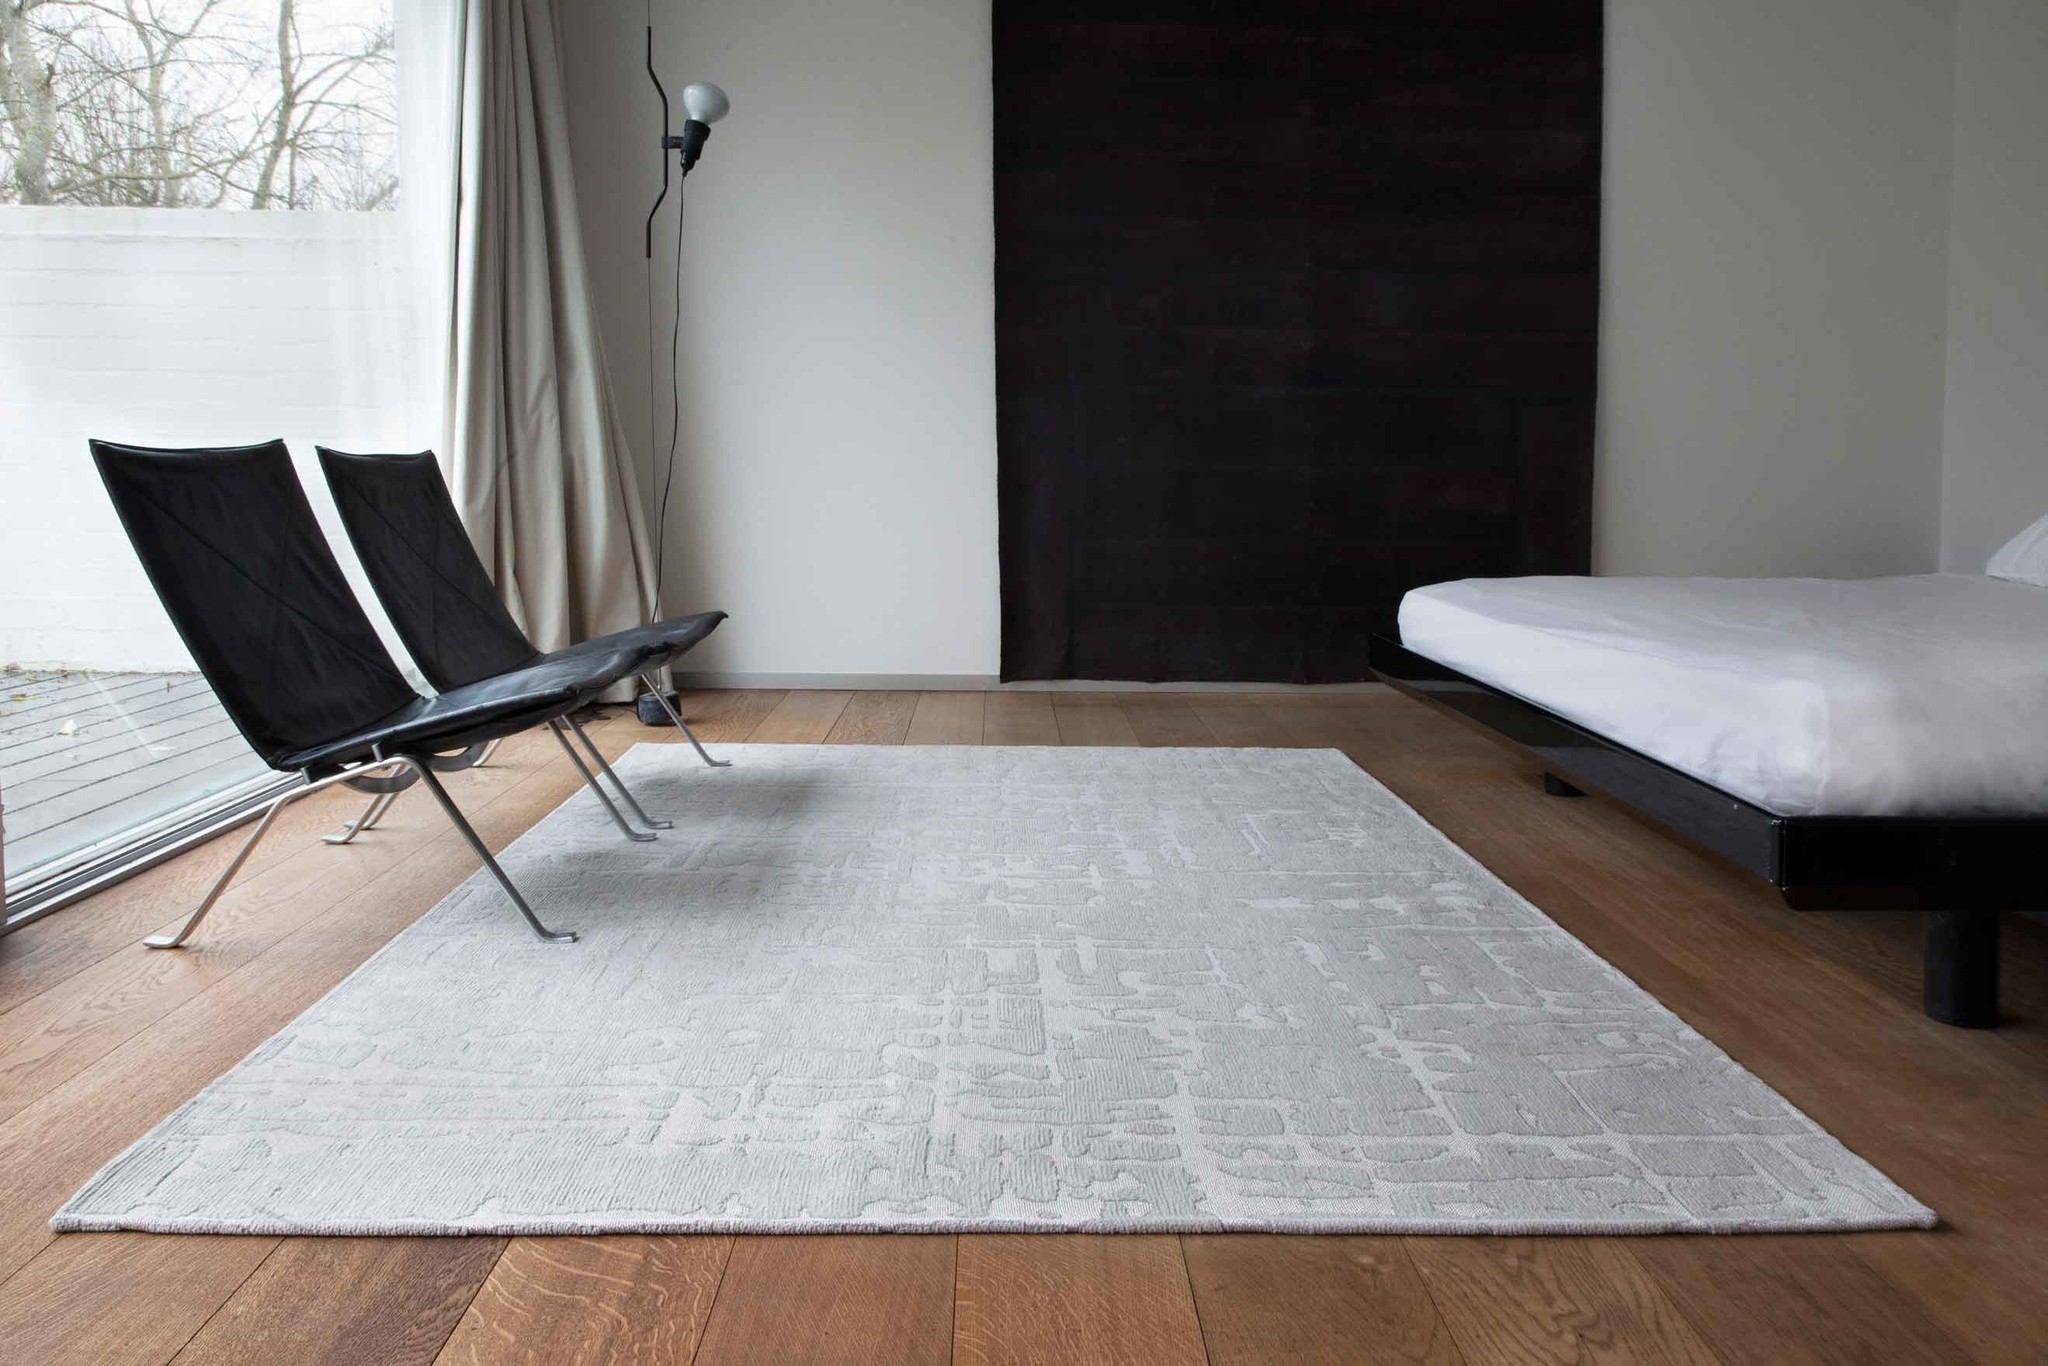 Abstract Silver Belgian Rug ☞ Size: 2' 7" x 8' 2" (80 x 250 cm)